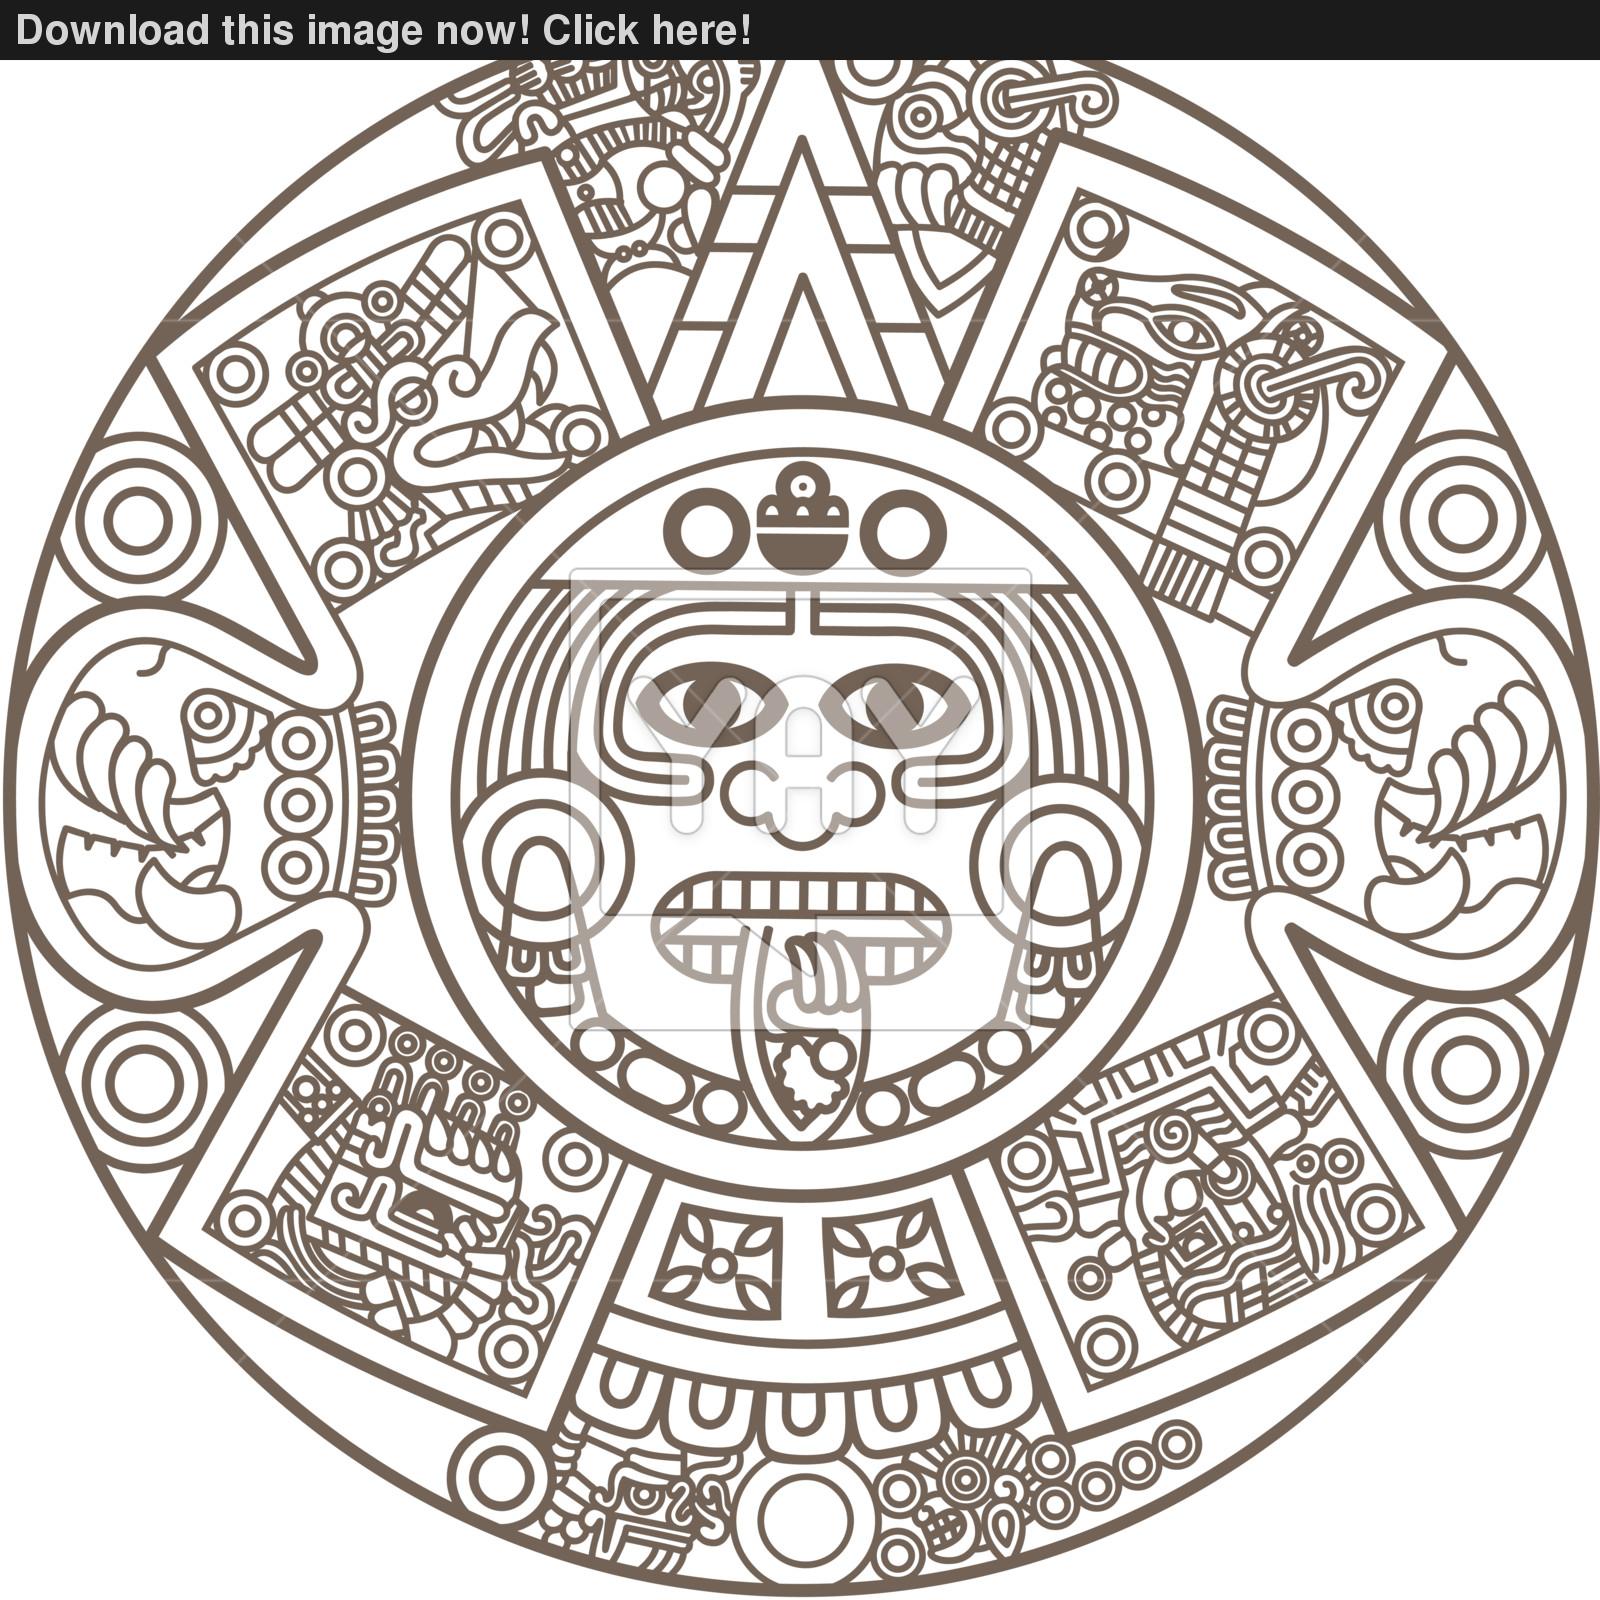 Aztec Calendar Drawing At GetDrawings Free For Personal Use Aztec